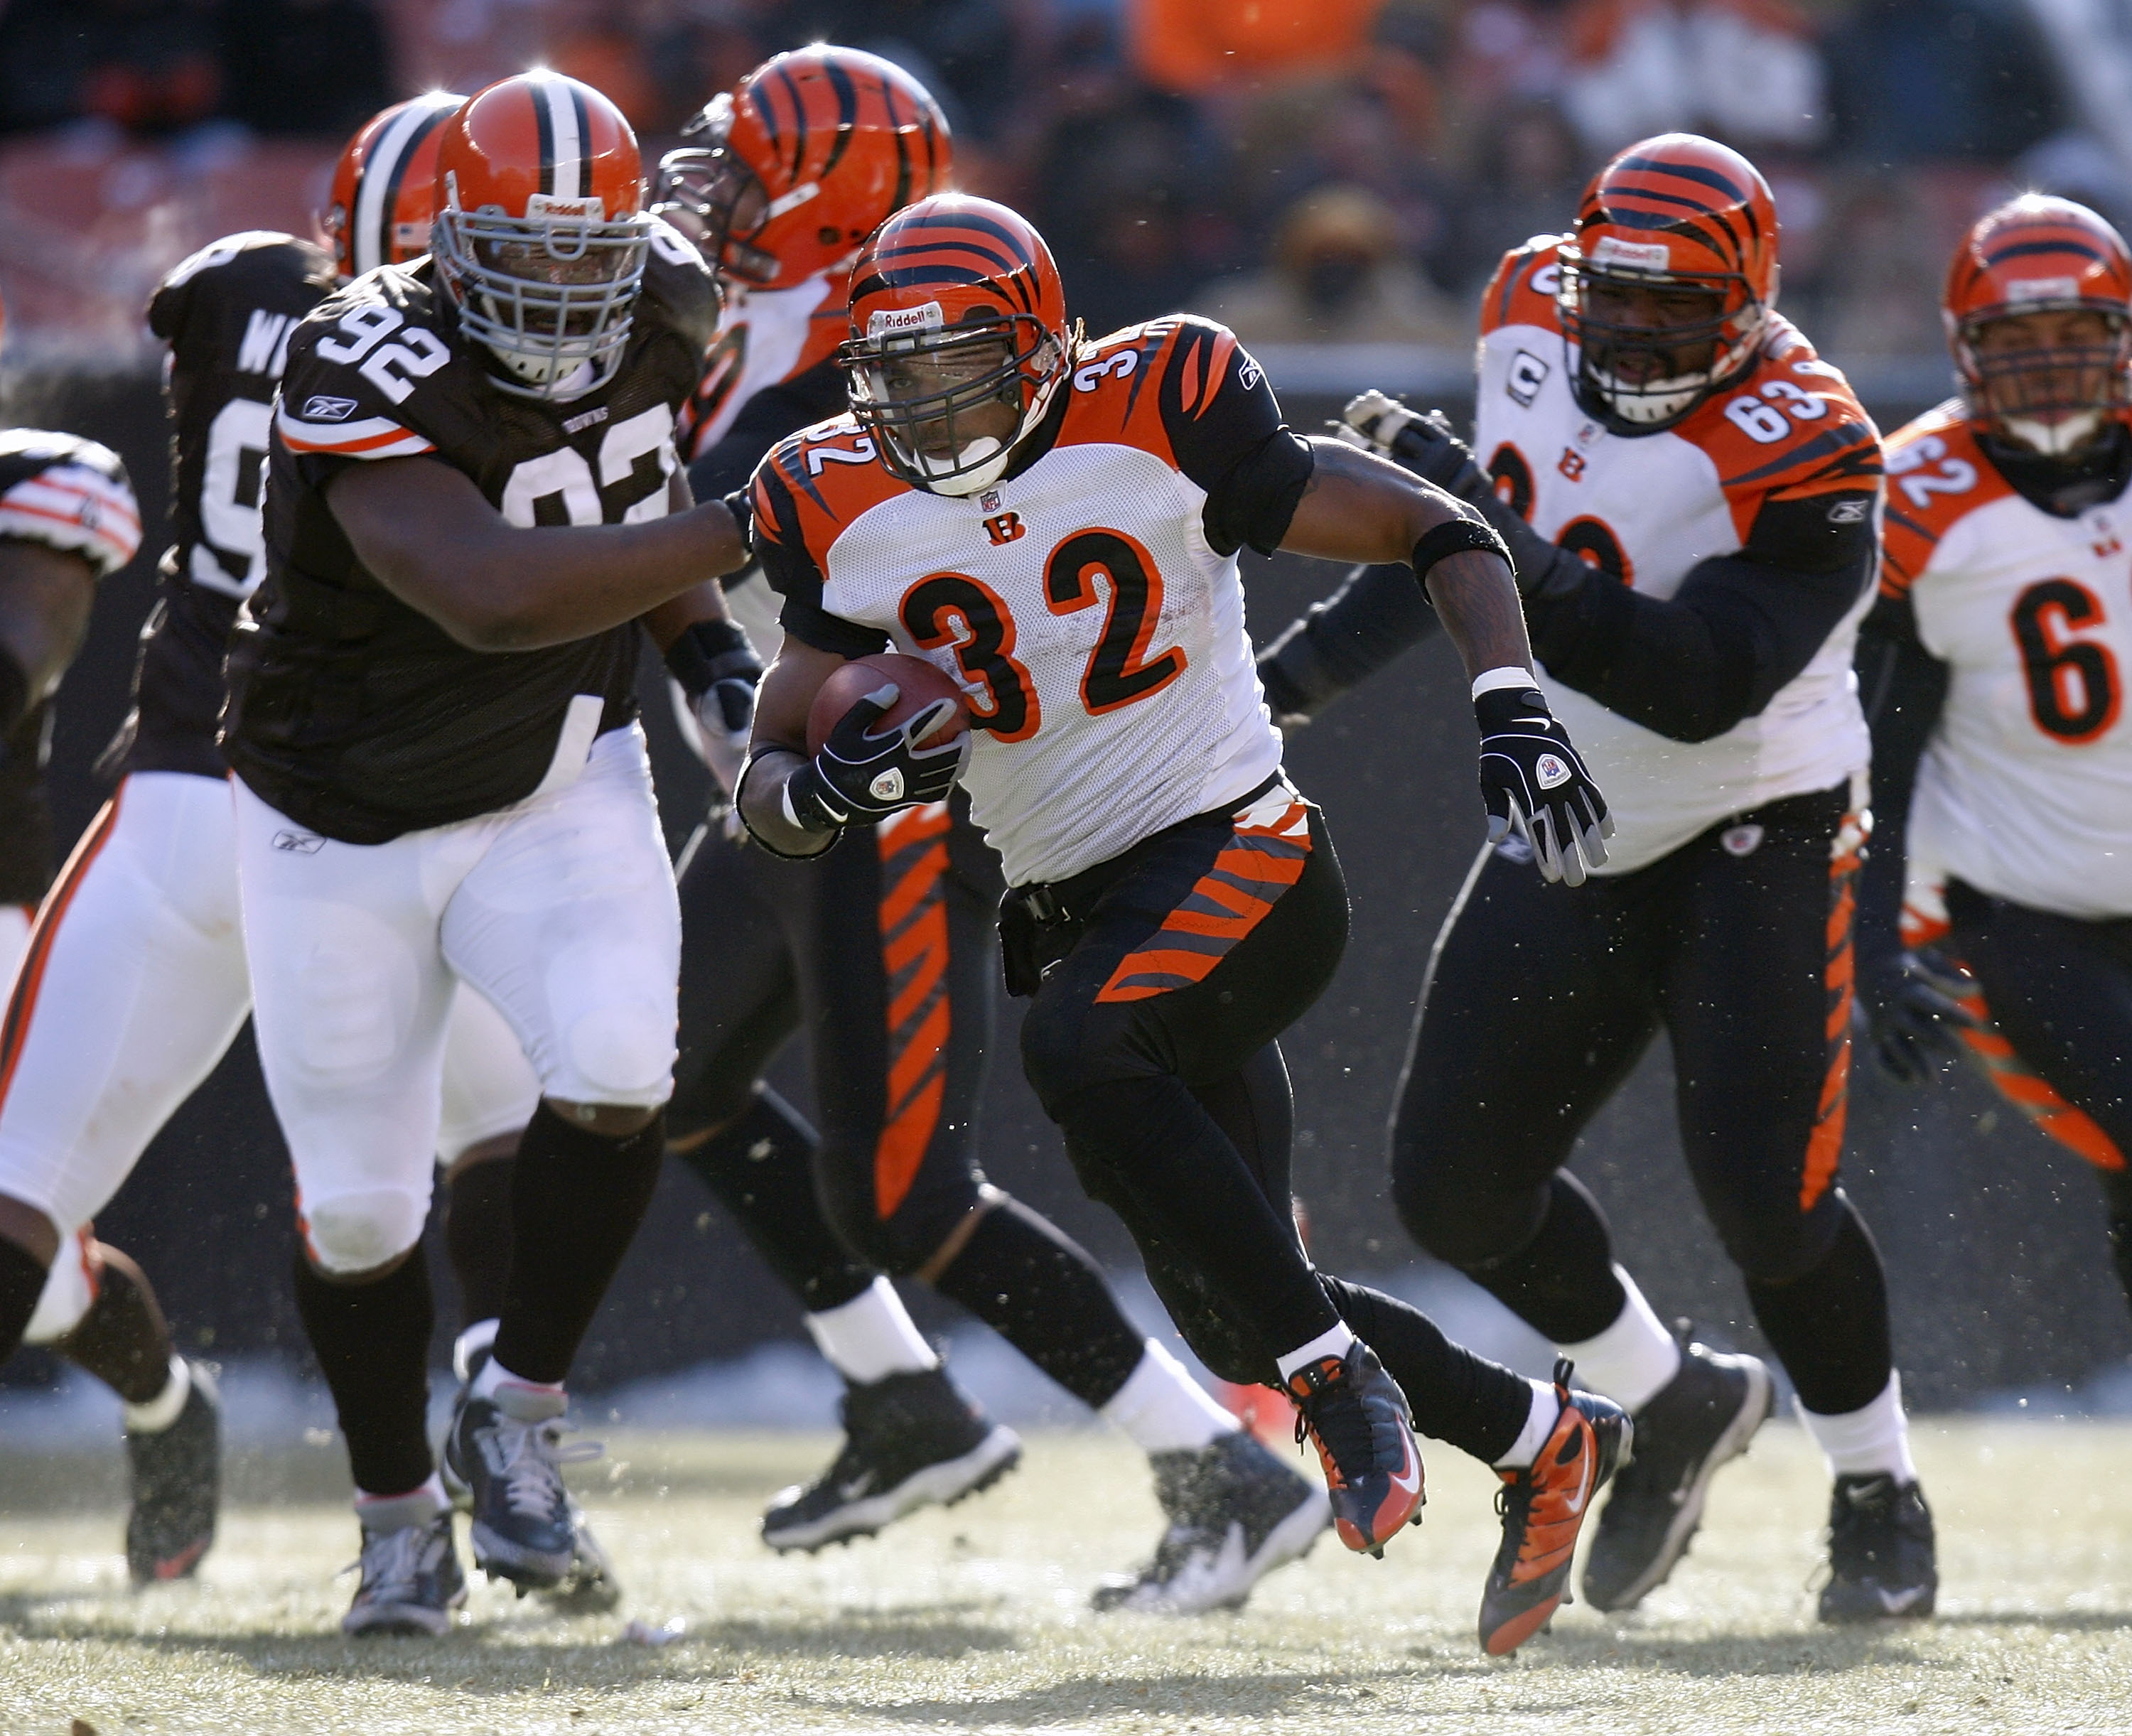 CLEVELAND - DECEMBER 21:  Cedric Benson #32 of the Cincinnati Bengals gets into the open field in front of Shaun Rogers #92 of the Cleveland Browns during a first quarter run at Cleveland Browns Stadium December 21, 2008 in Cleveland, Ohio. Cincinnati won